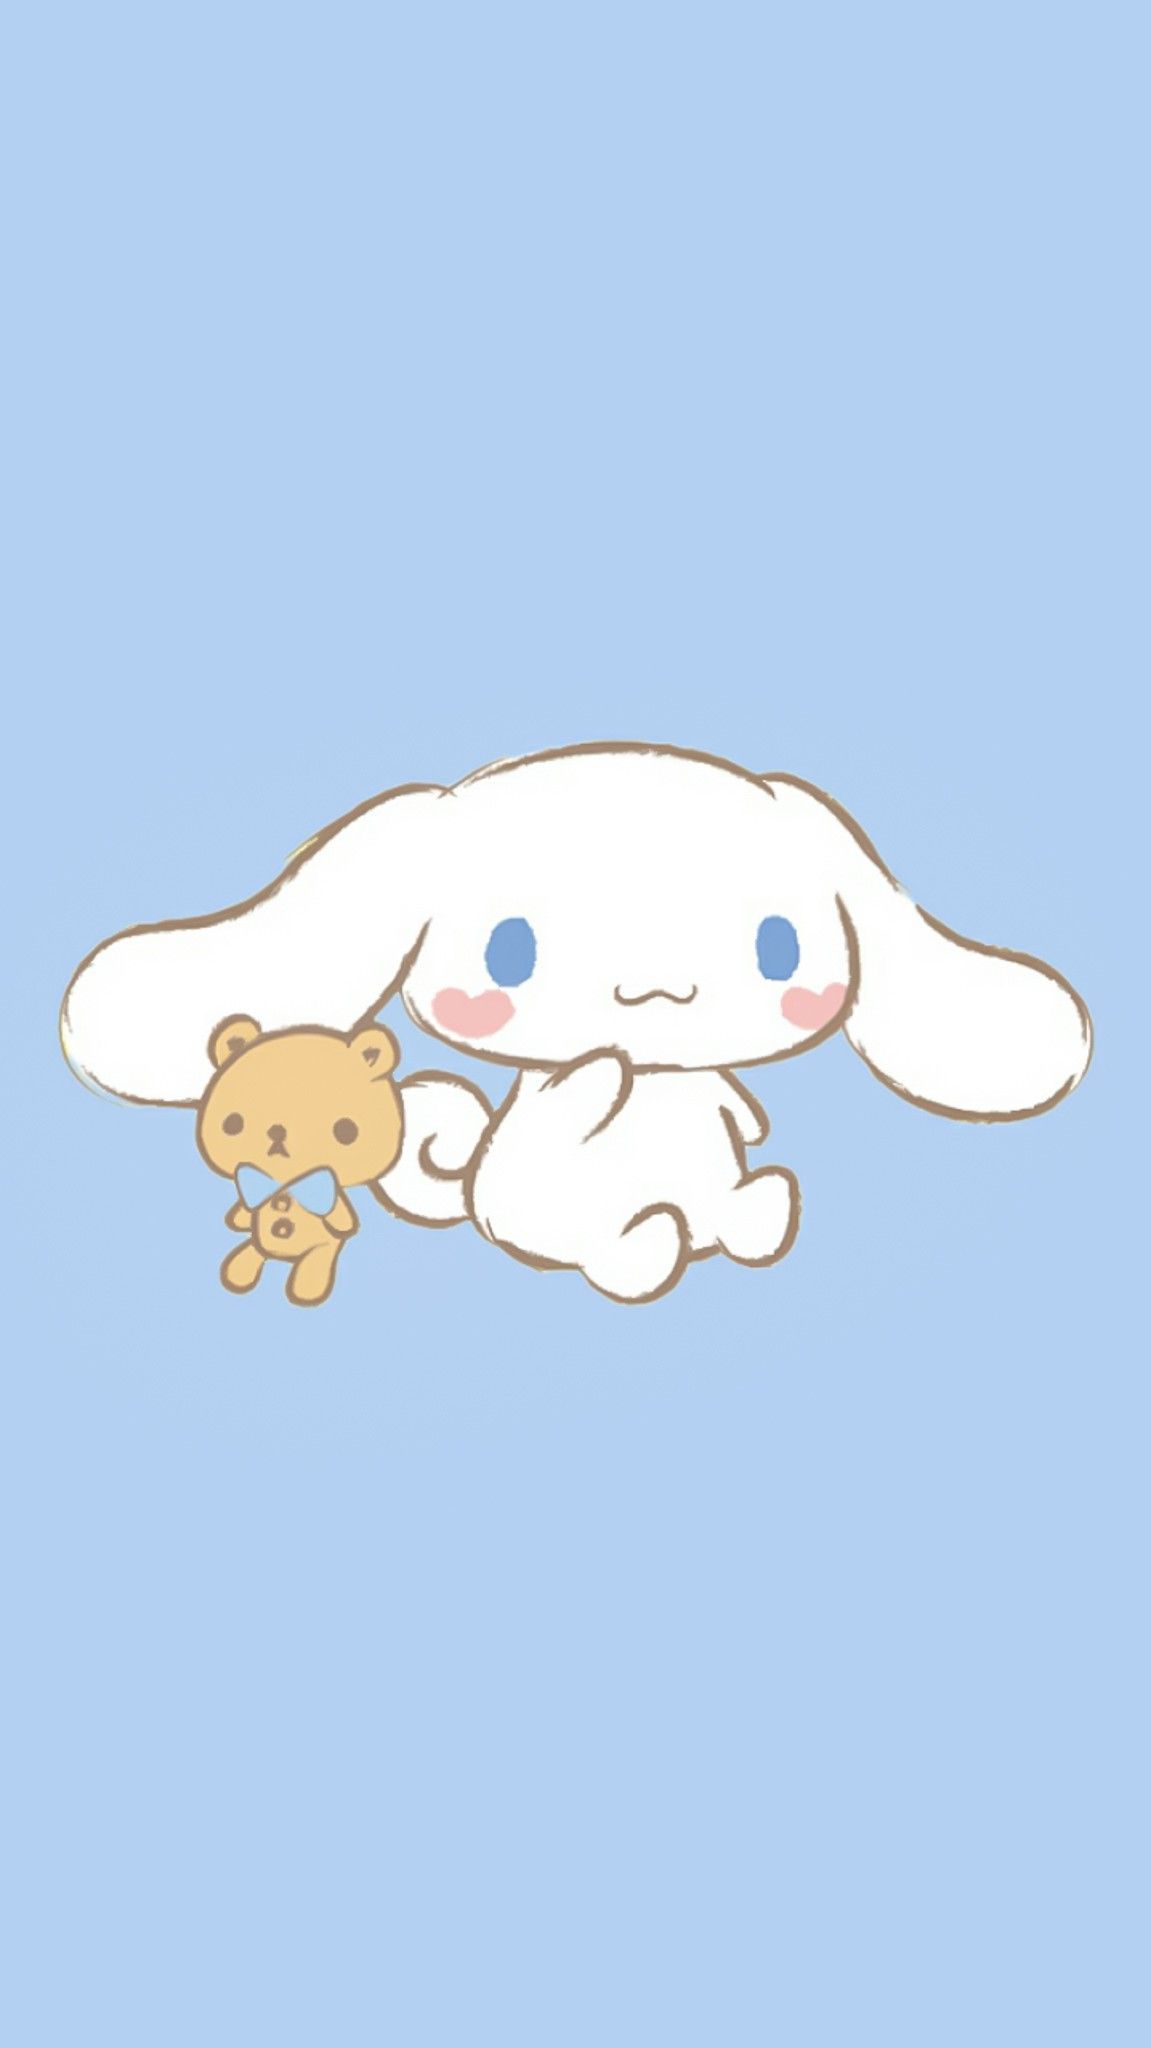 Miranda Jane on Twitter Im so obsessed with these pastel  colored Kuromi and Cinnamoroll wallpapers wallpapers originated from  Pinterest httpstcob4CvFpewG3  Twitter